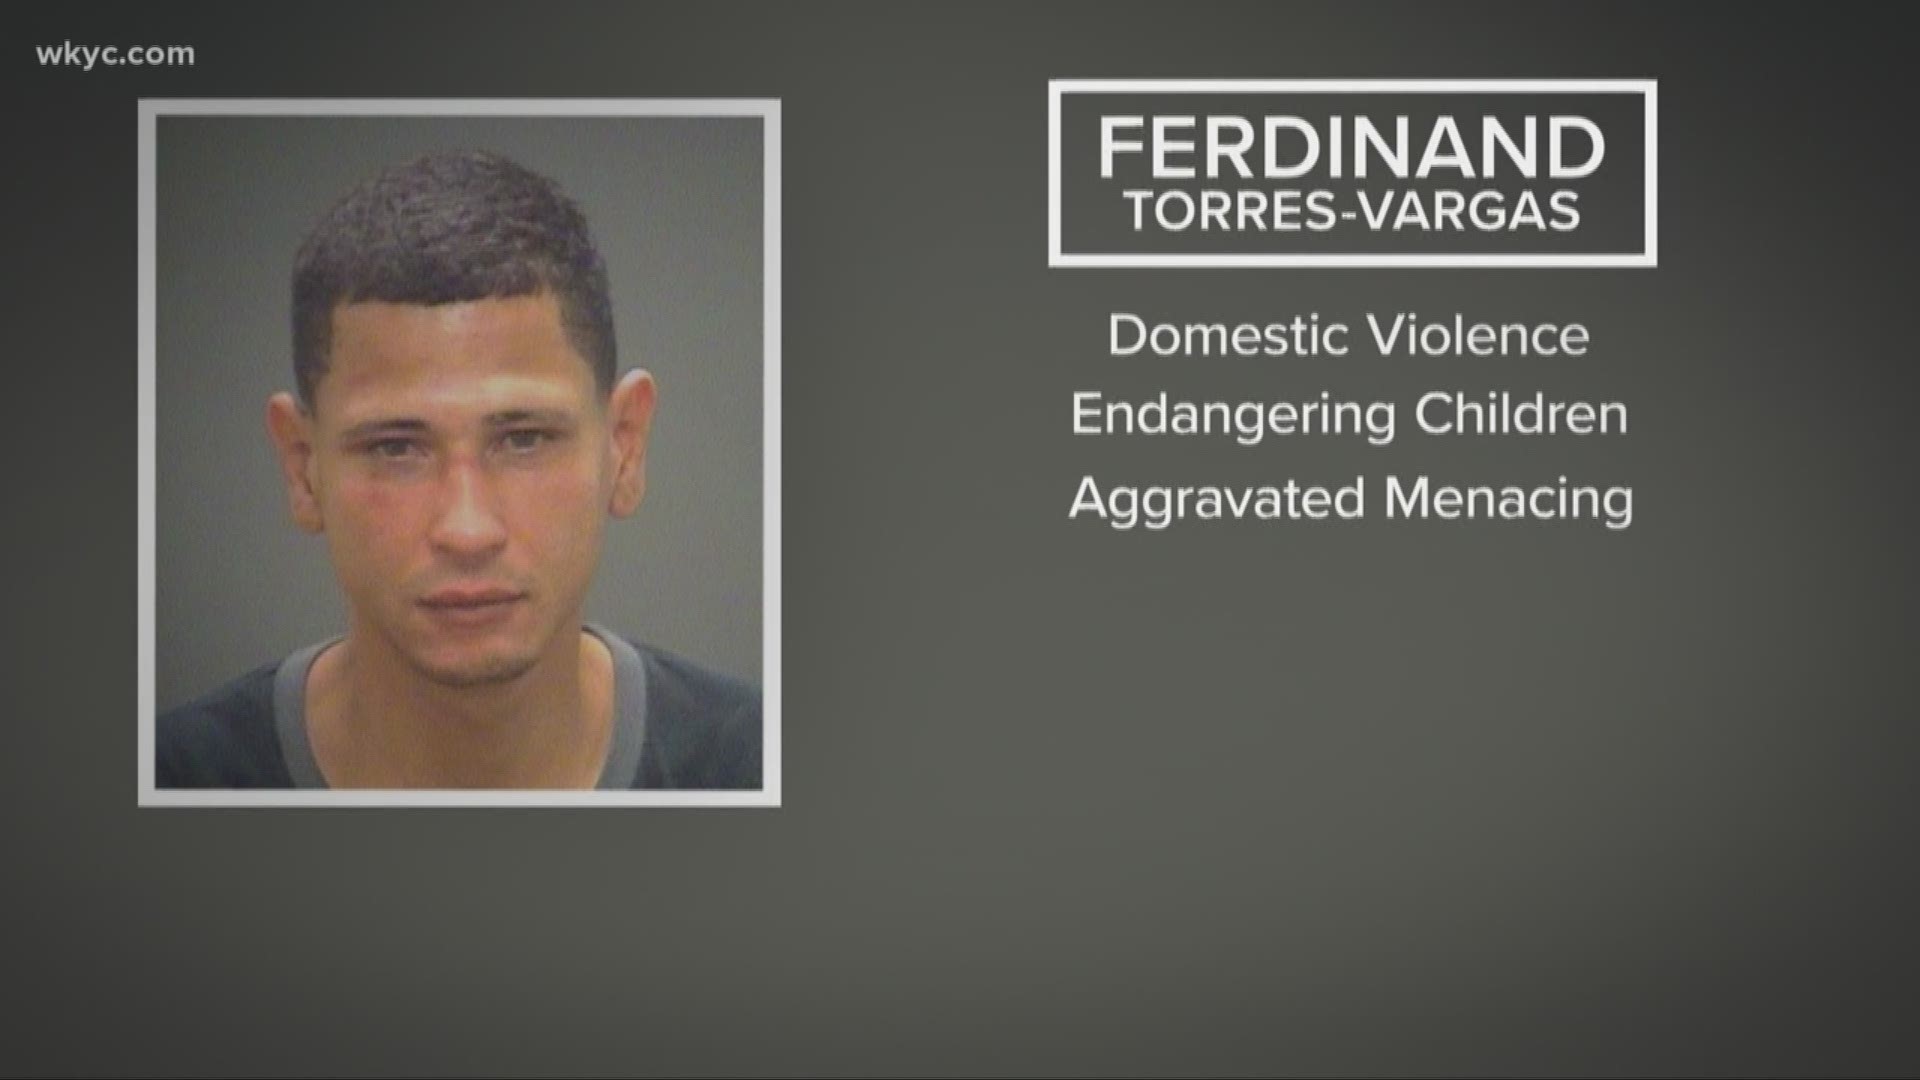 According to Cuyahoga County Acting Sheriff David Schilling, Ferdinand Torres-Vargas was arrested around noon on Thursday in Brooklyn after investigators received a tip. A $2,500 reward will be paid.